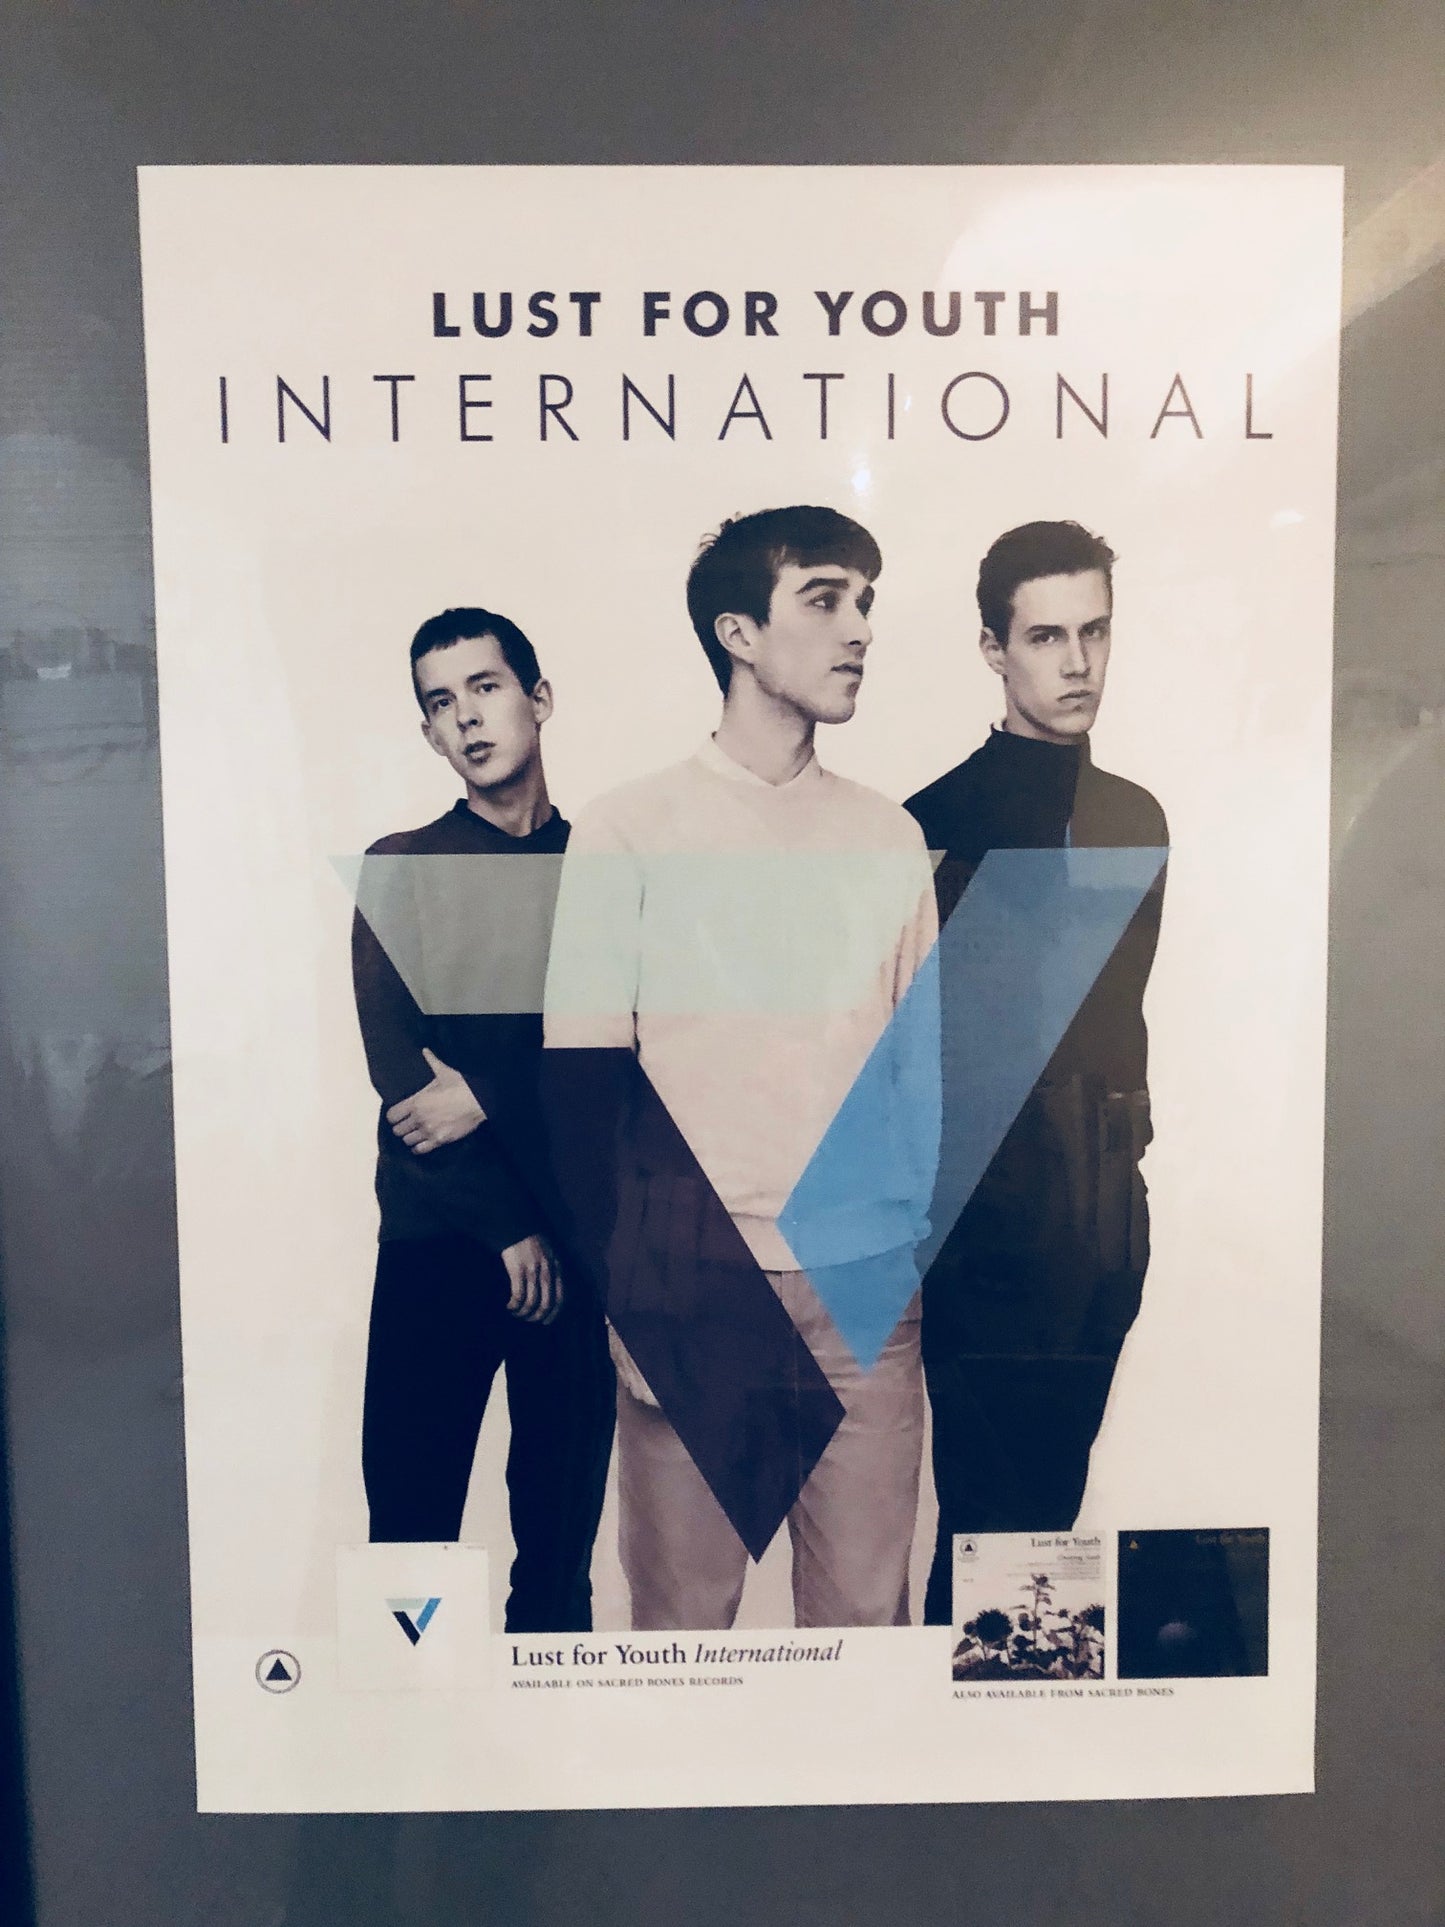 Lust for youth - International - Poster